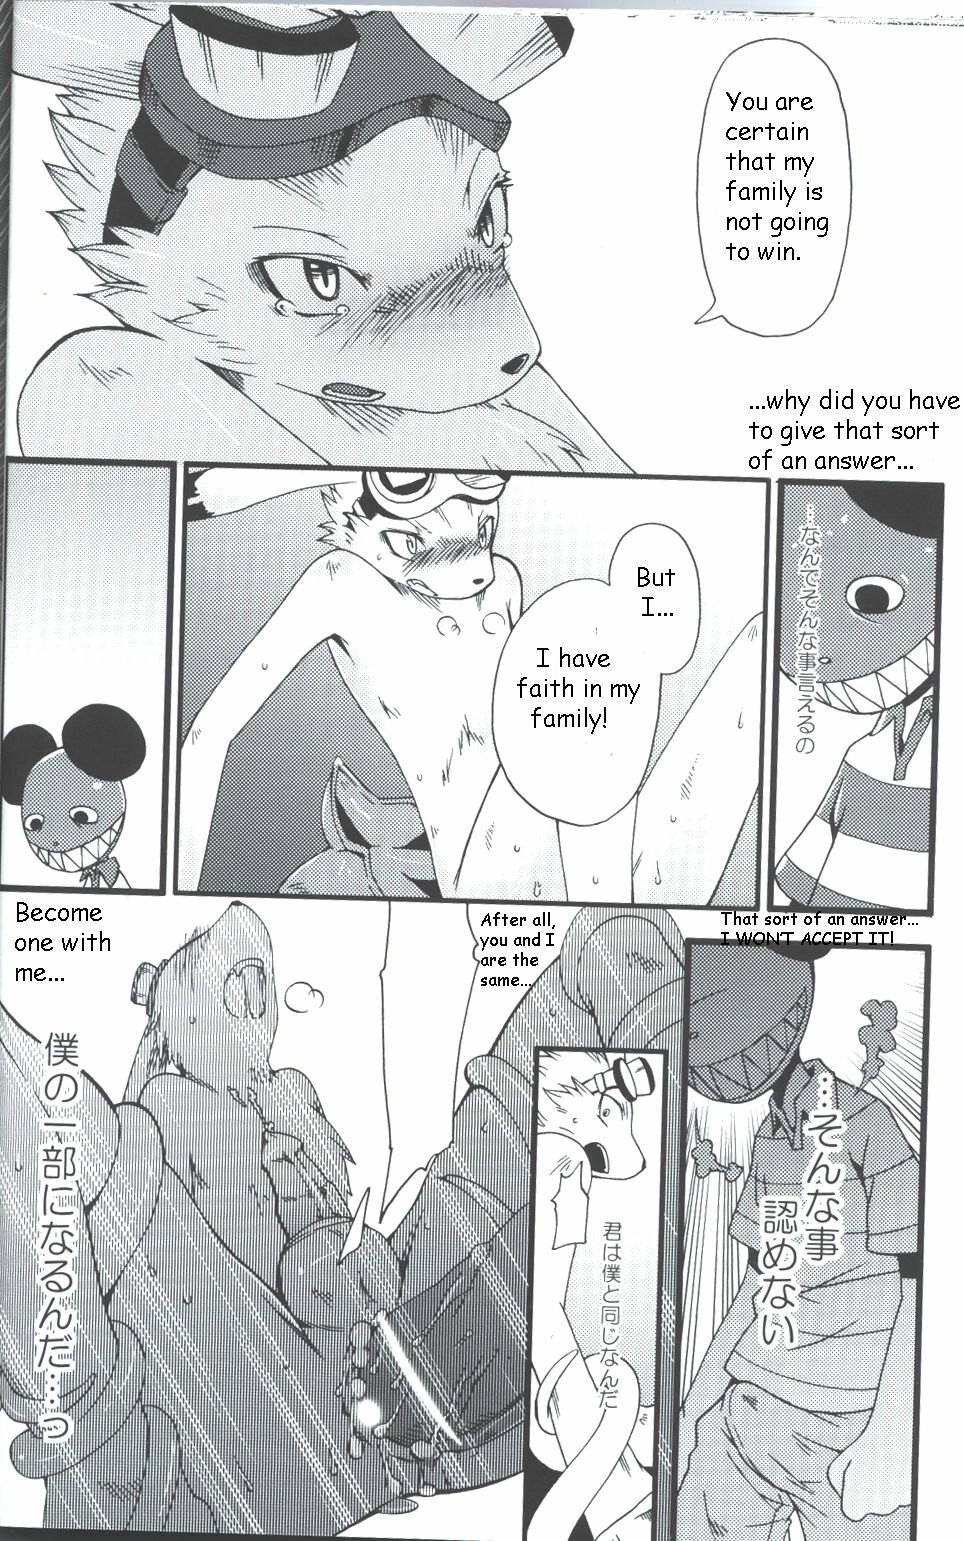 [Dogear (Inumimi Moeta)] Requirements of the King (Summer Wars) [English] page 18 full